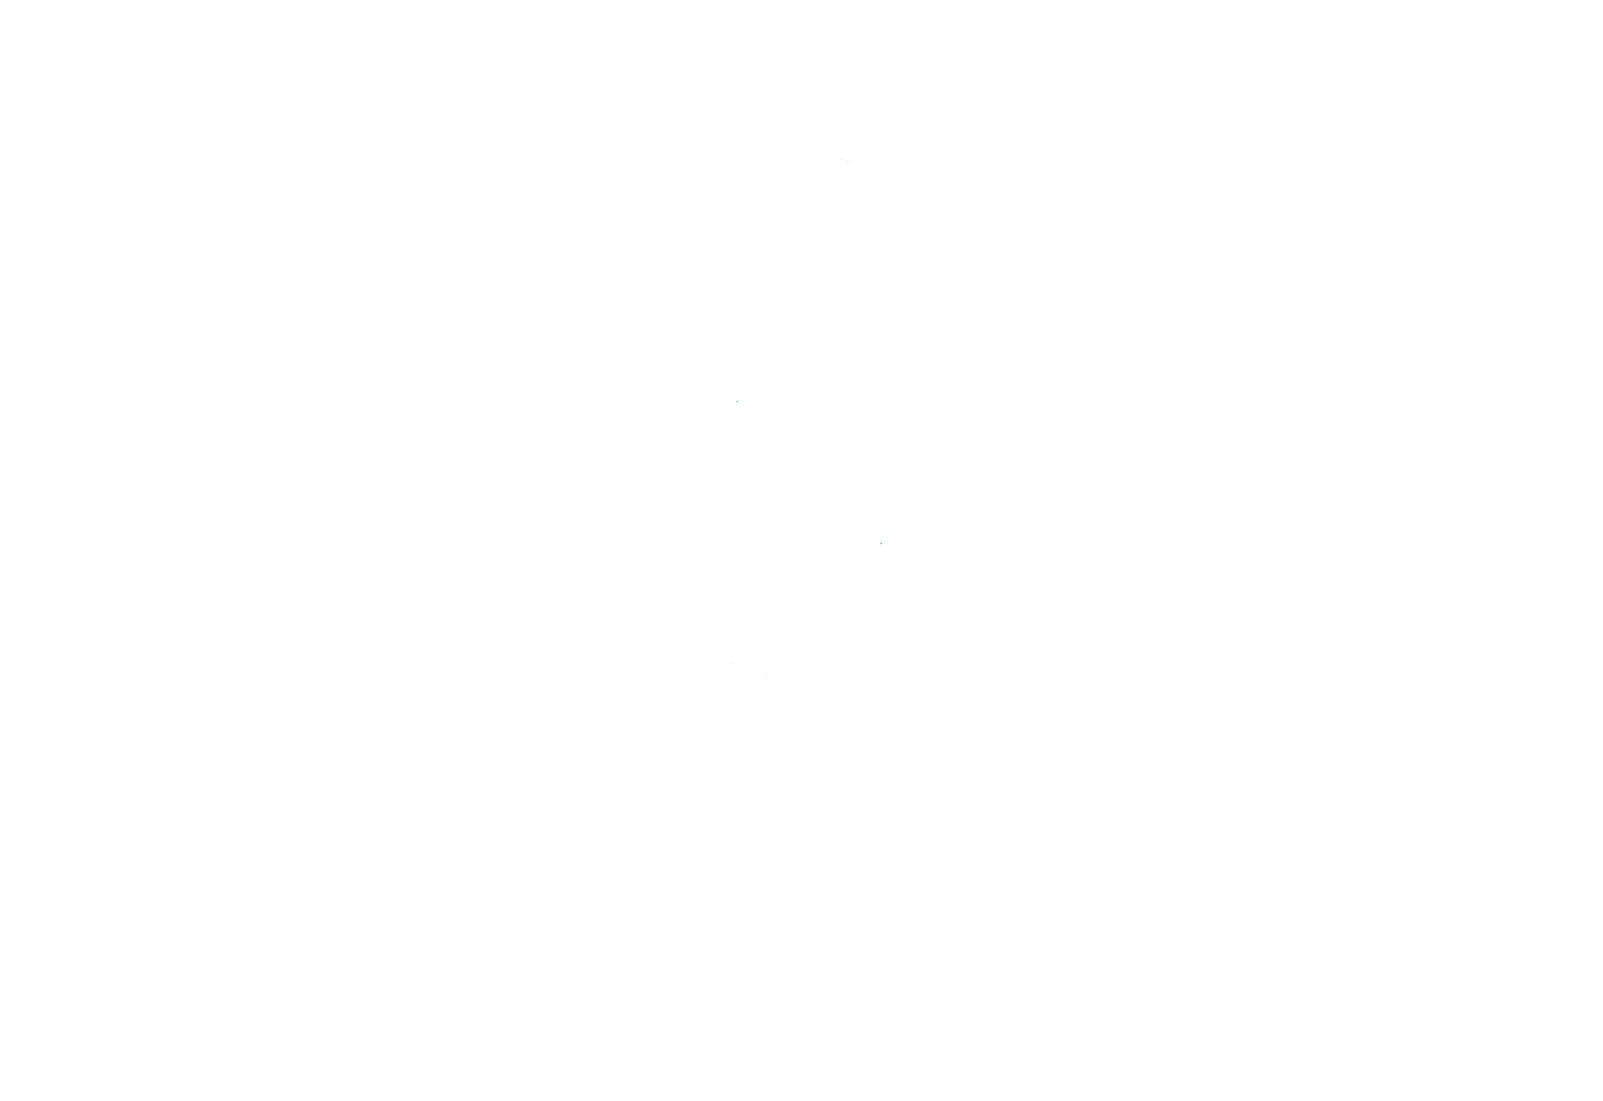 Wellbeing services county of Central Ostrobothnia Soite